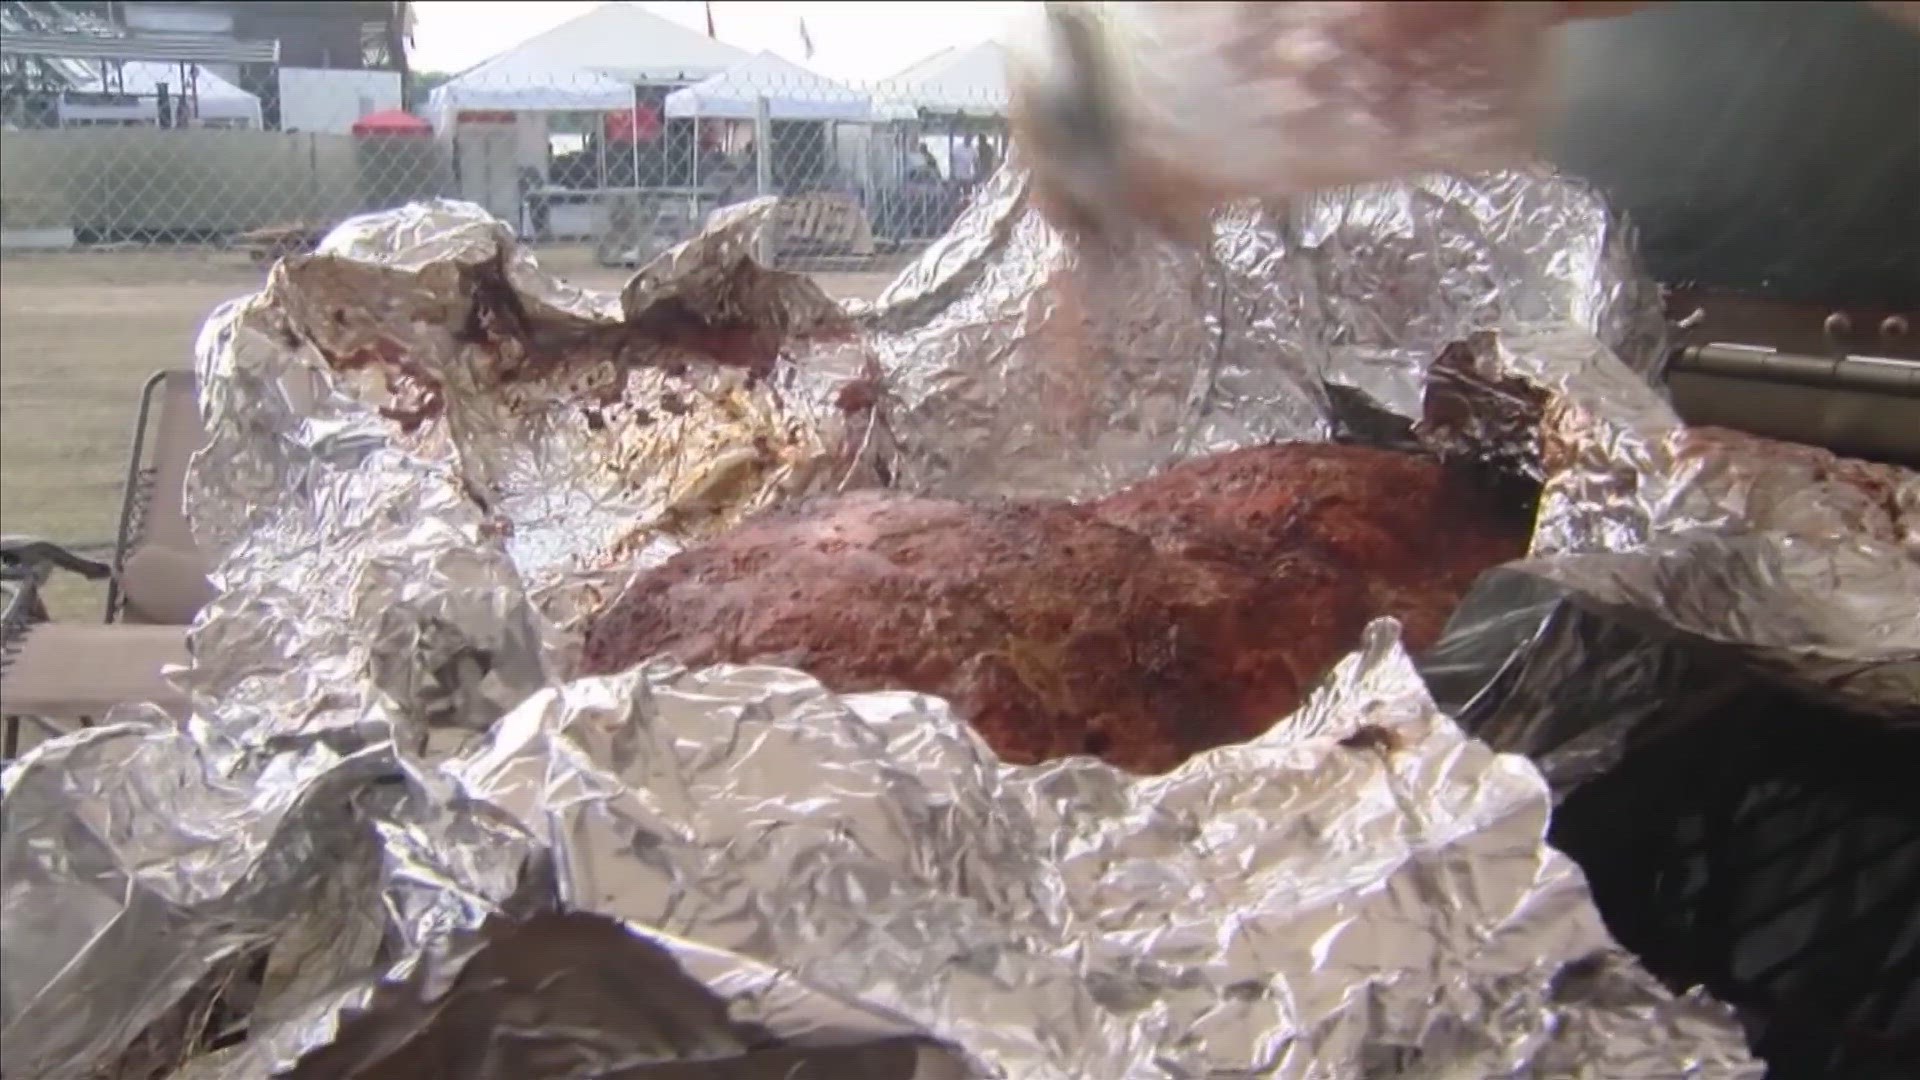 The smell of barbecue will fill the air as pitmasters from around the world compete at the World Championship Barbecue Cooking Contest at Tom Lee Park.